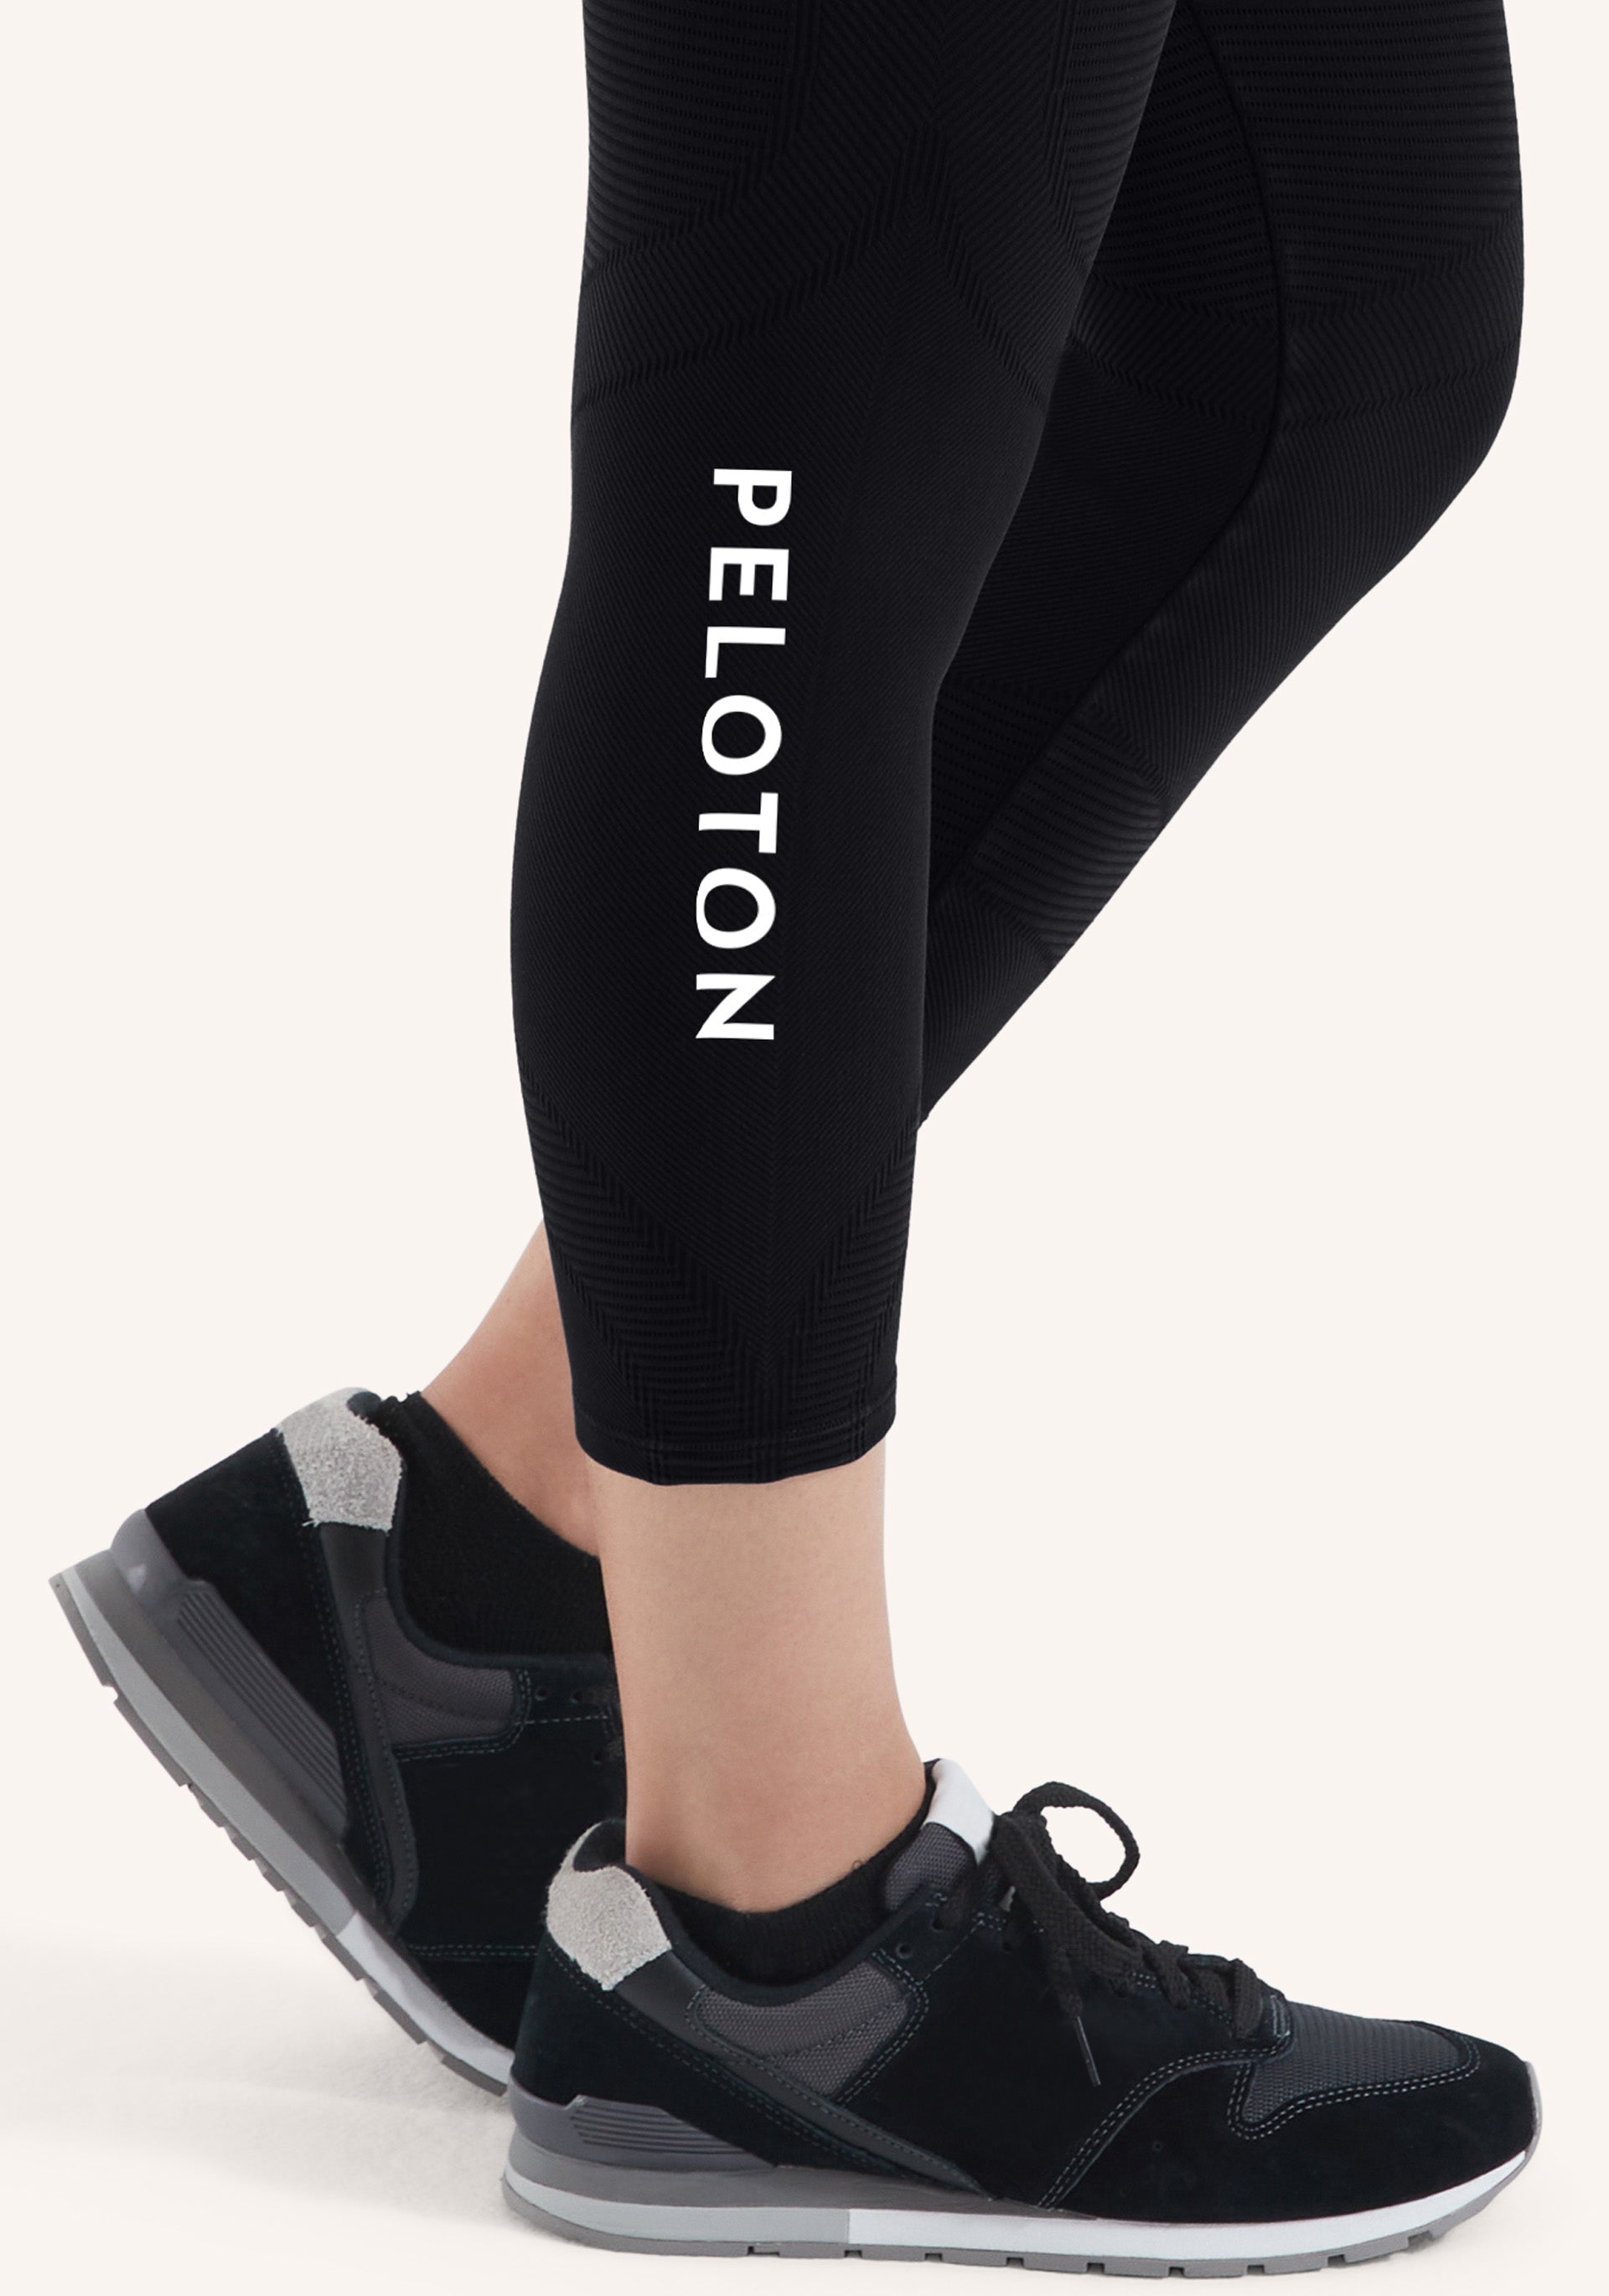 Colored Gym Wear Tights at best price in Kalyan by Oneclick Enterprises